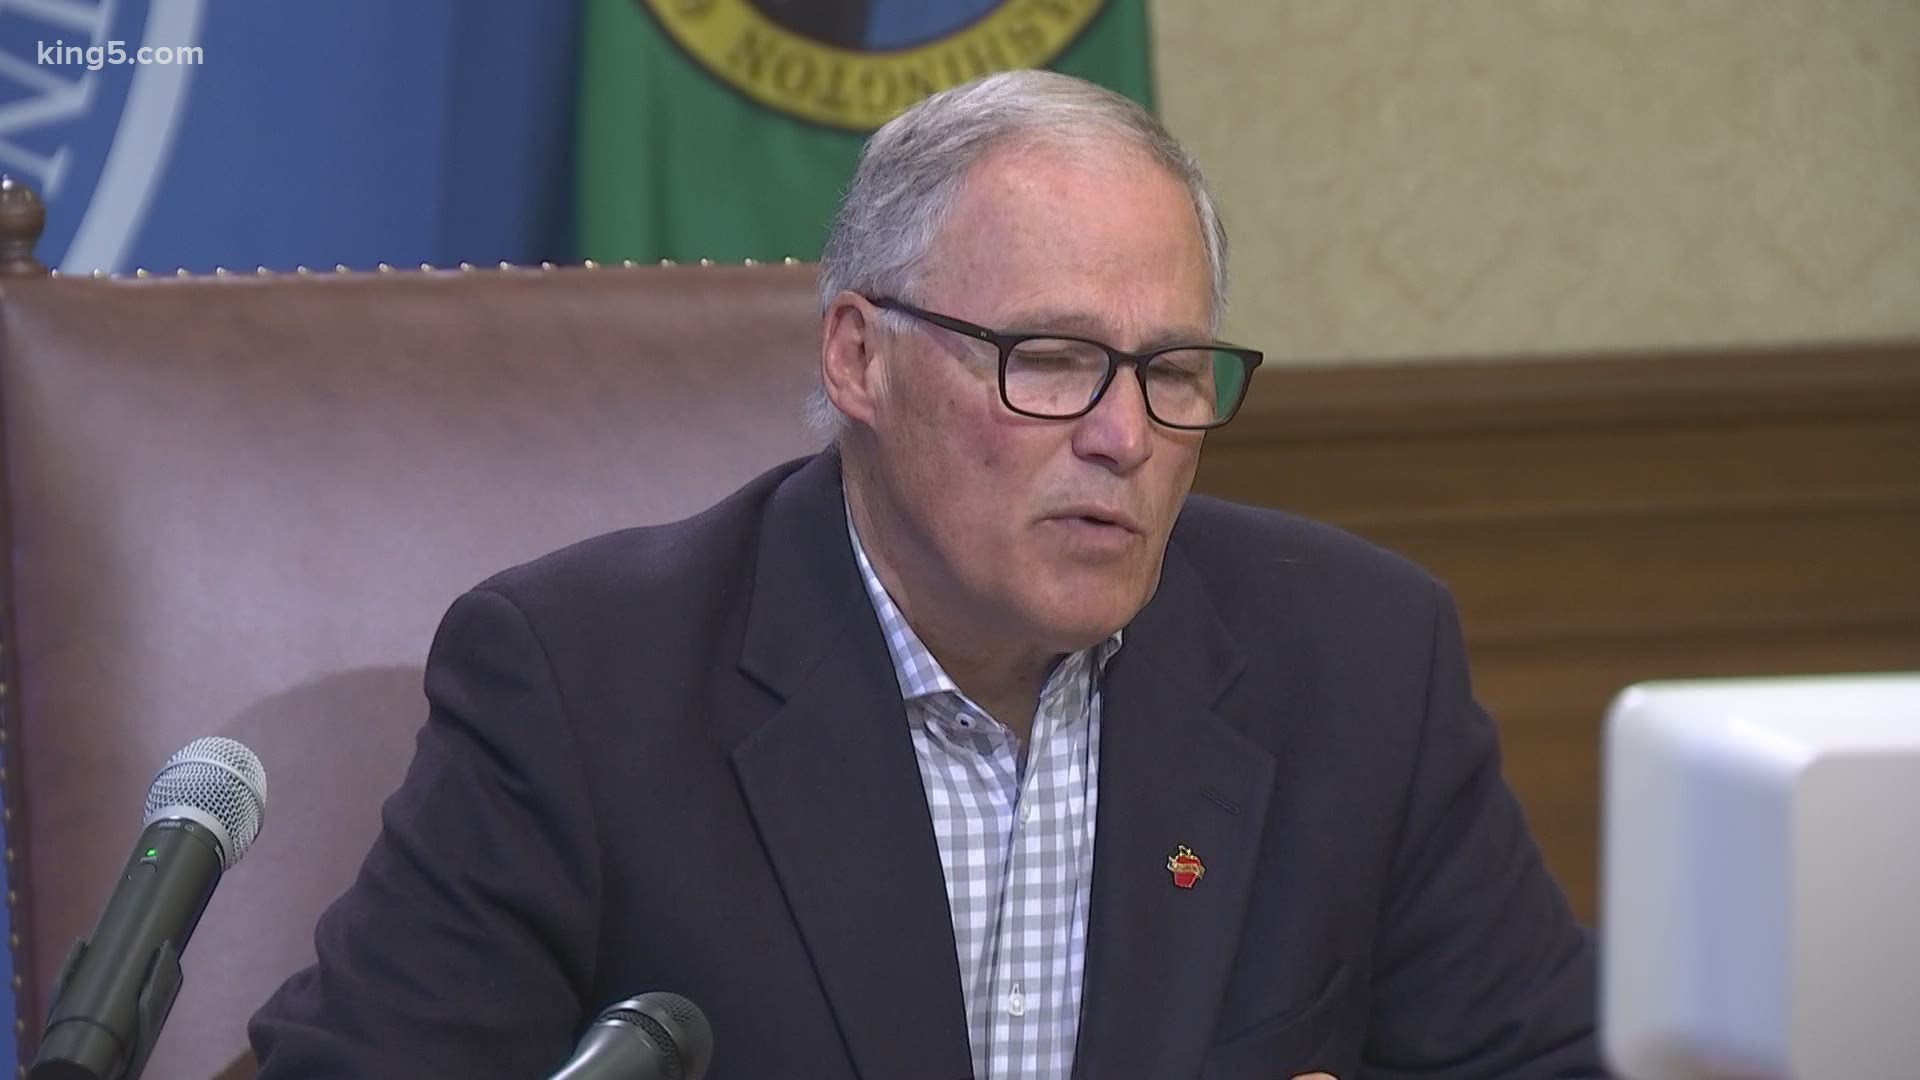 Governor Jay Inslee spoke with members of the retail, auto, and hospitality industries on Thursday to discuss the progress the state has made in Phase 1.